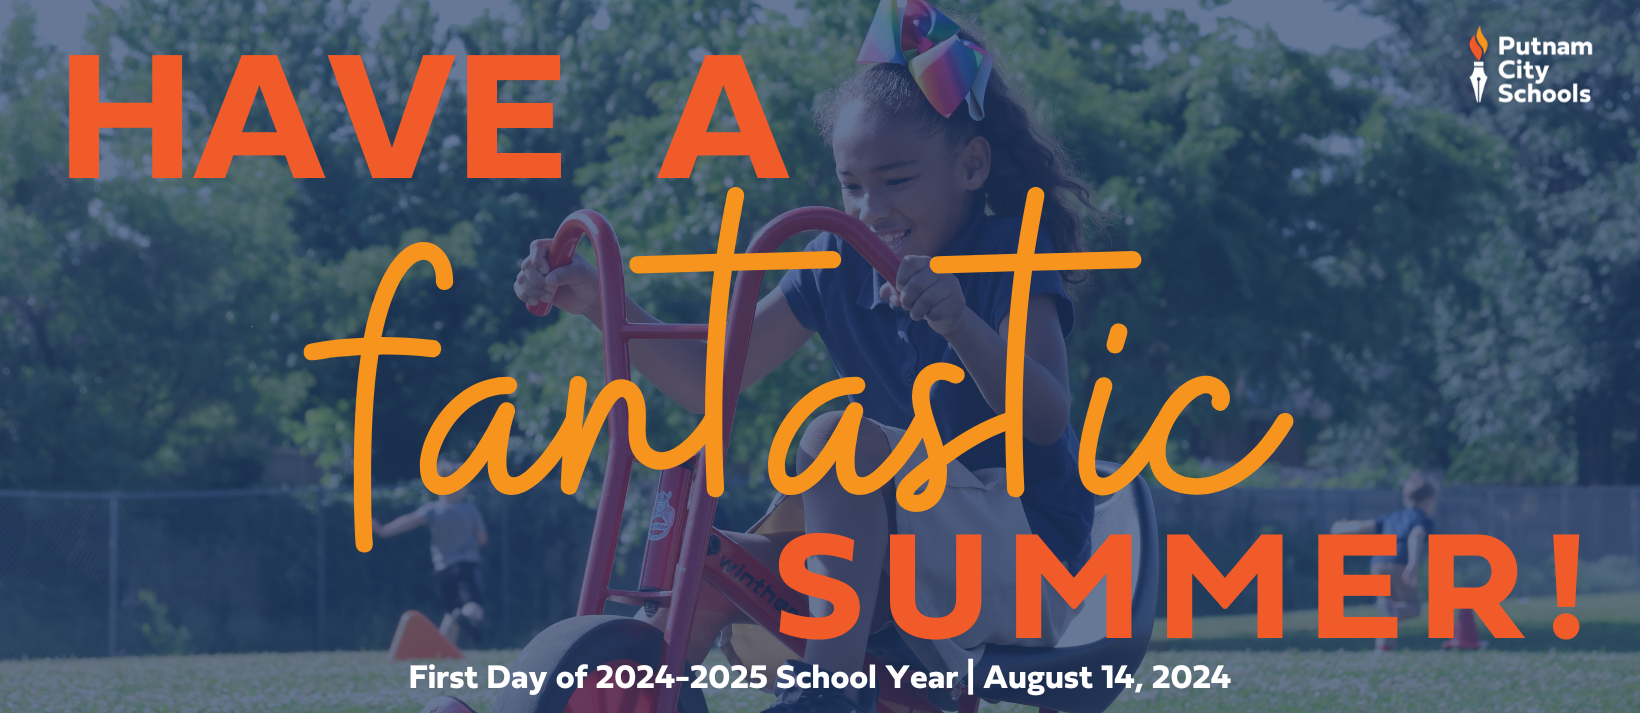 have a fantastic summer first day of 2024-2025 school year is august 14, 2024